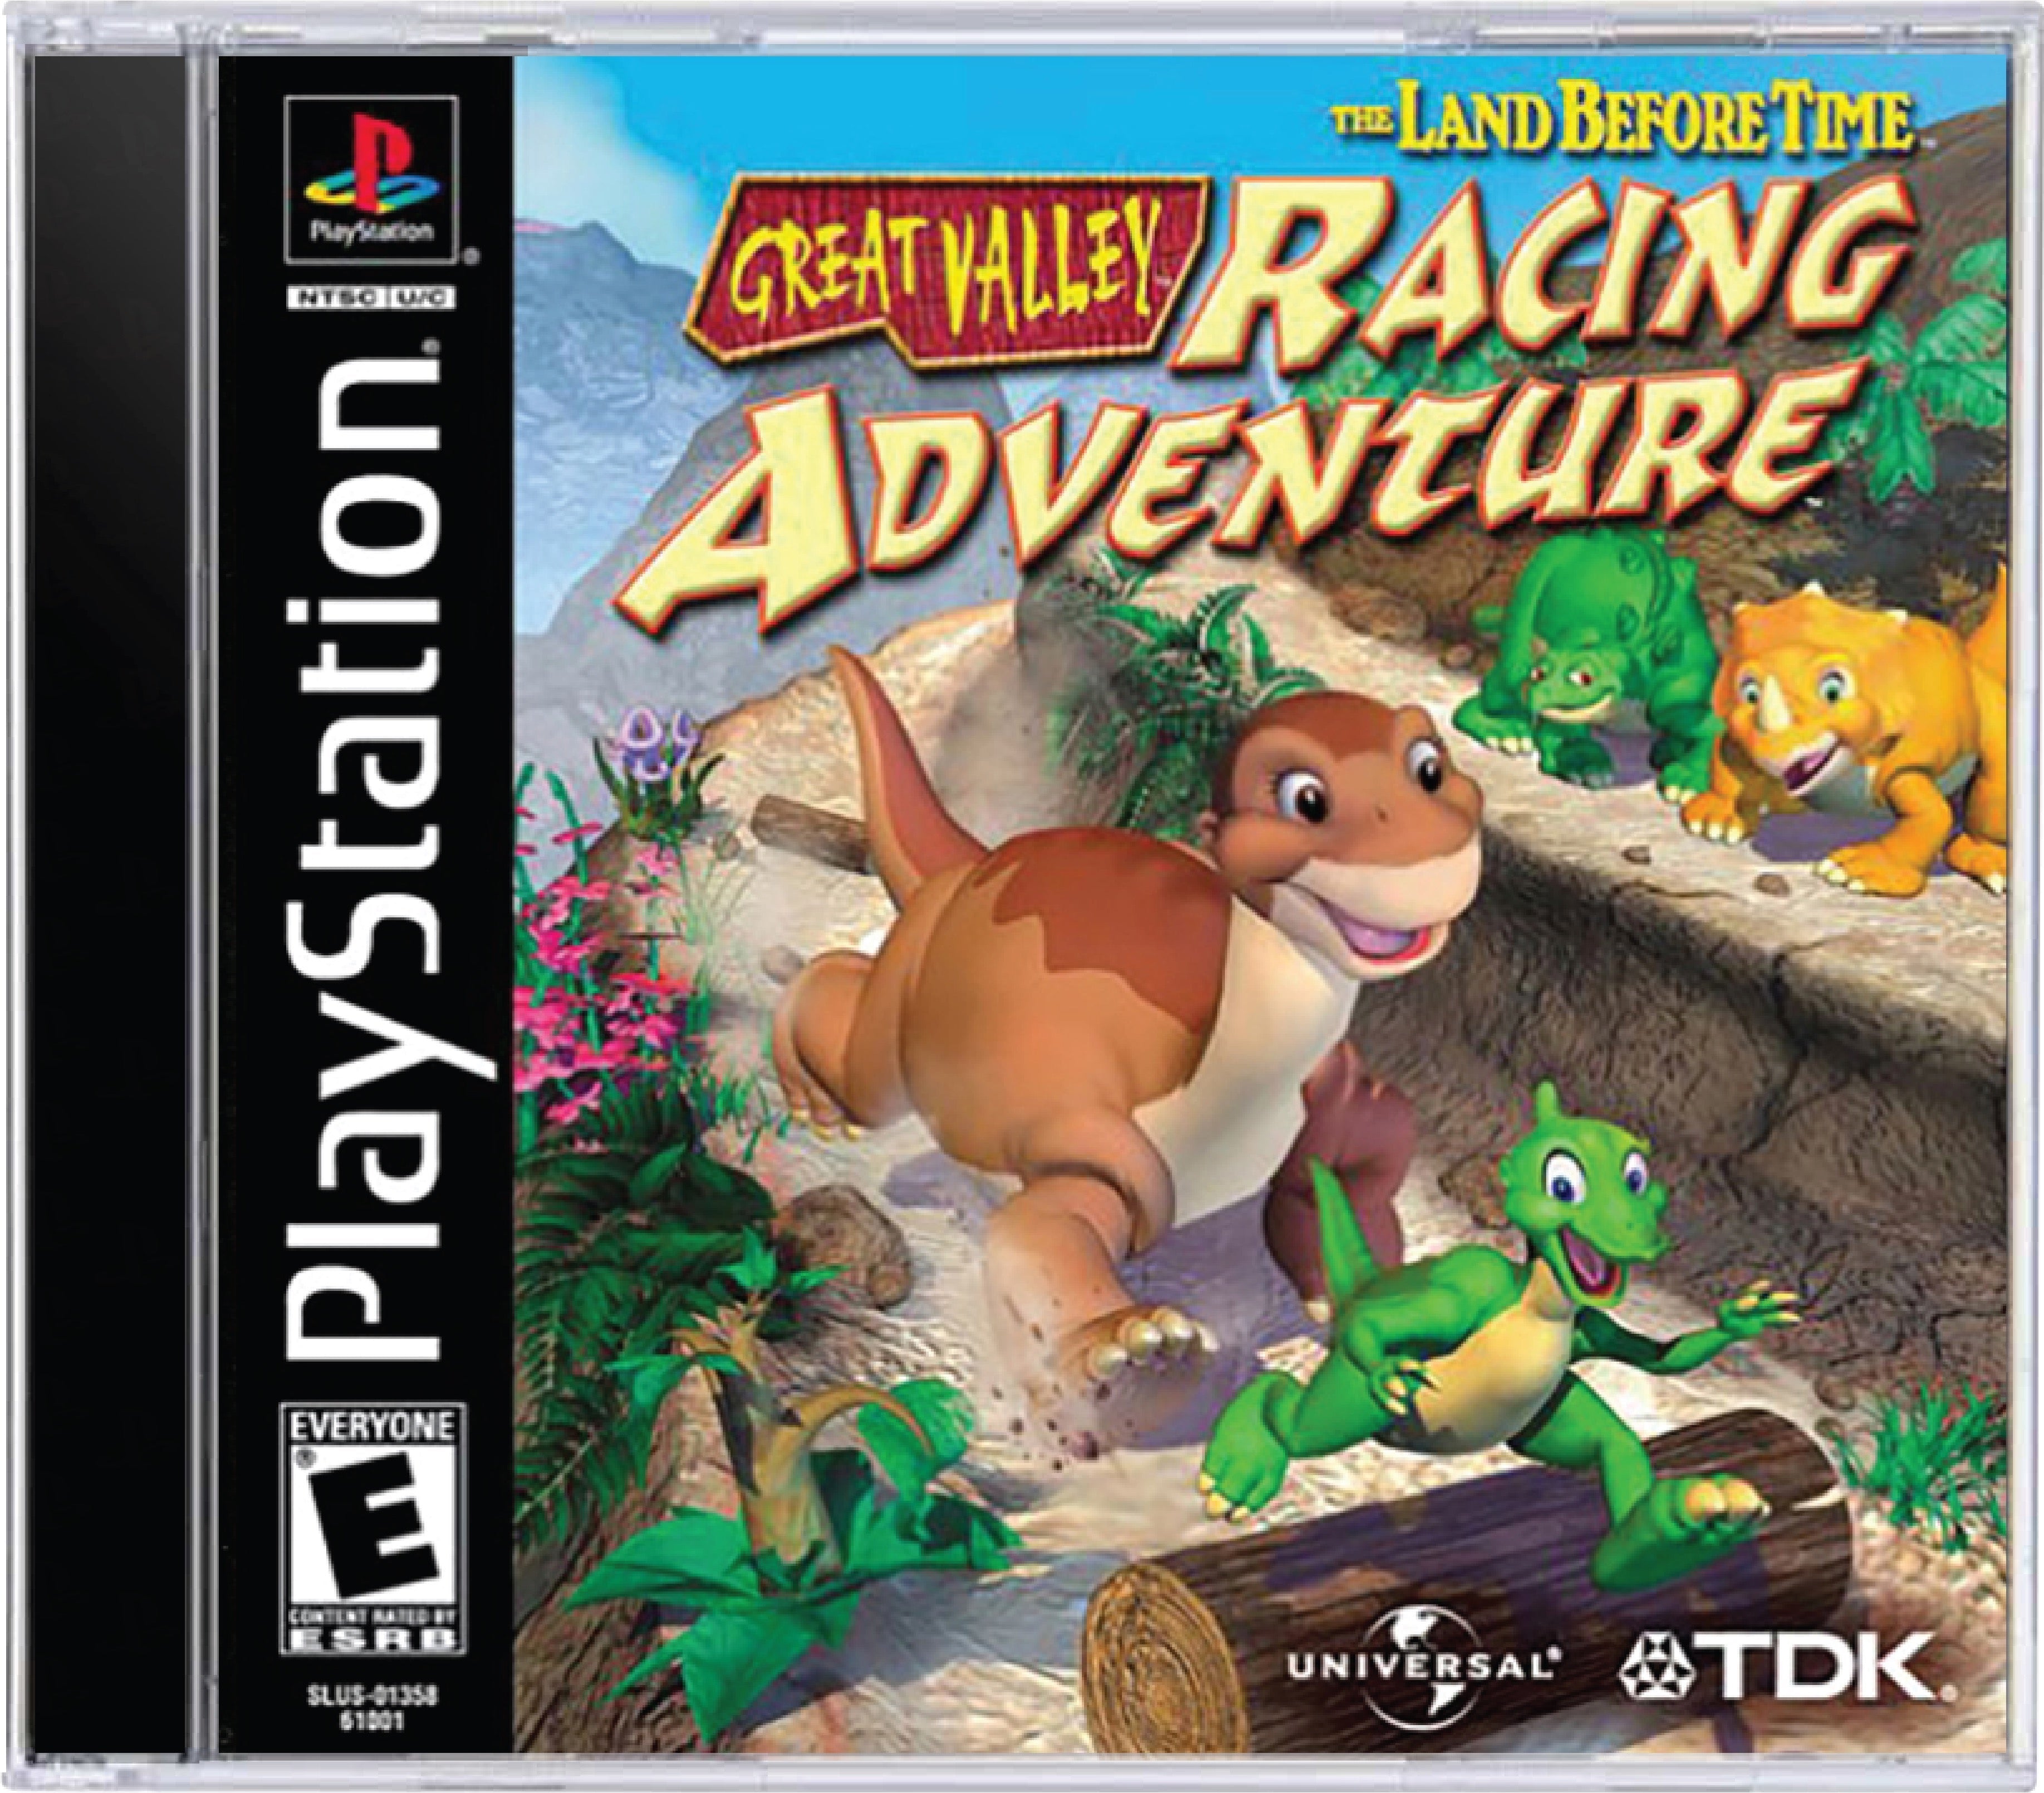 Land Before Time Great Valley Racing Adventure Cover Art and Product Photo